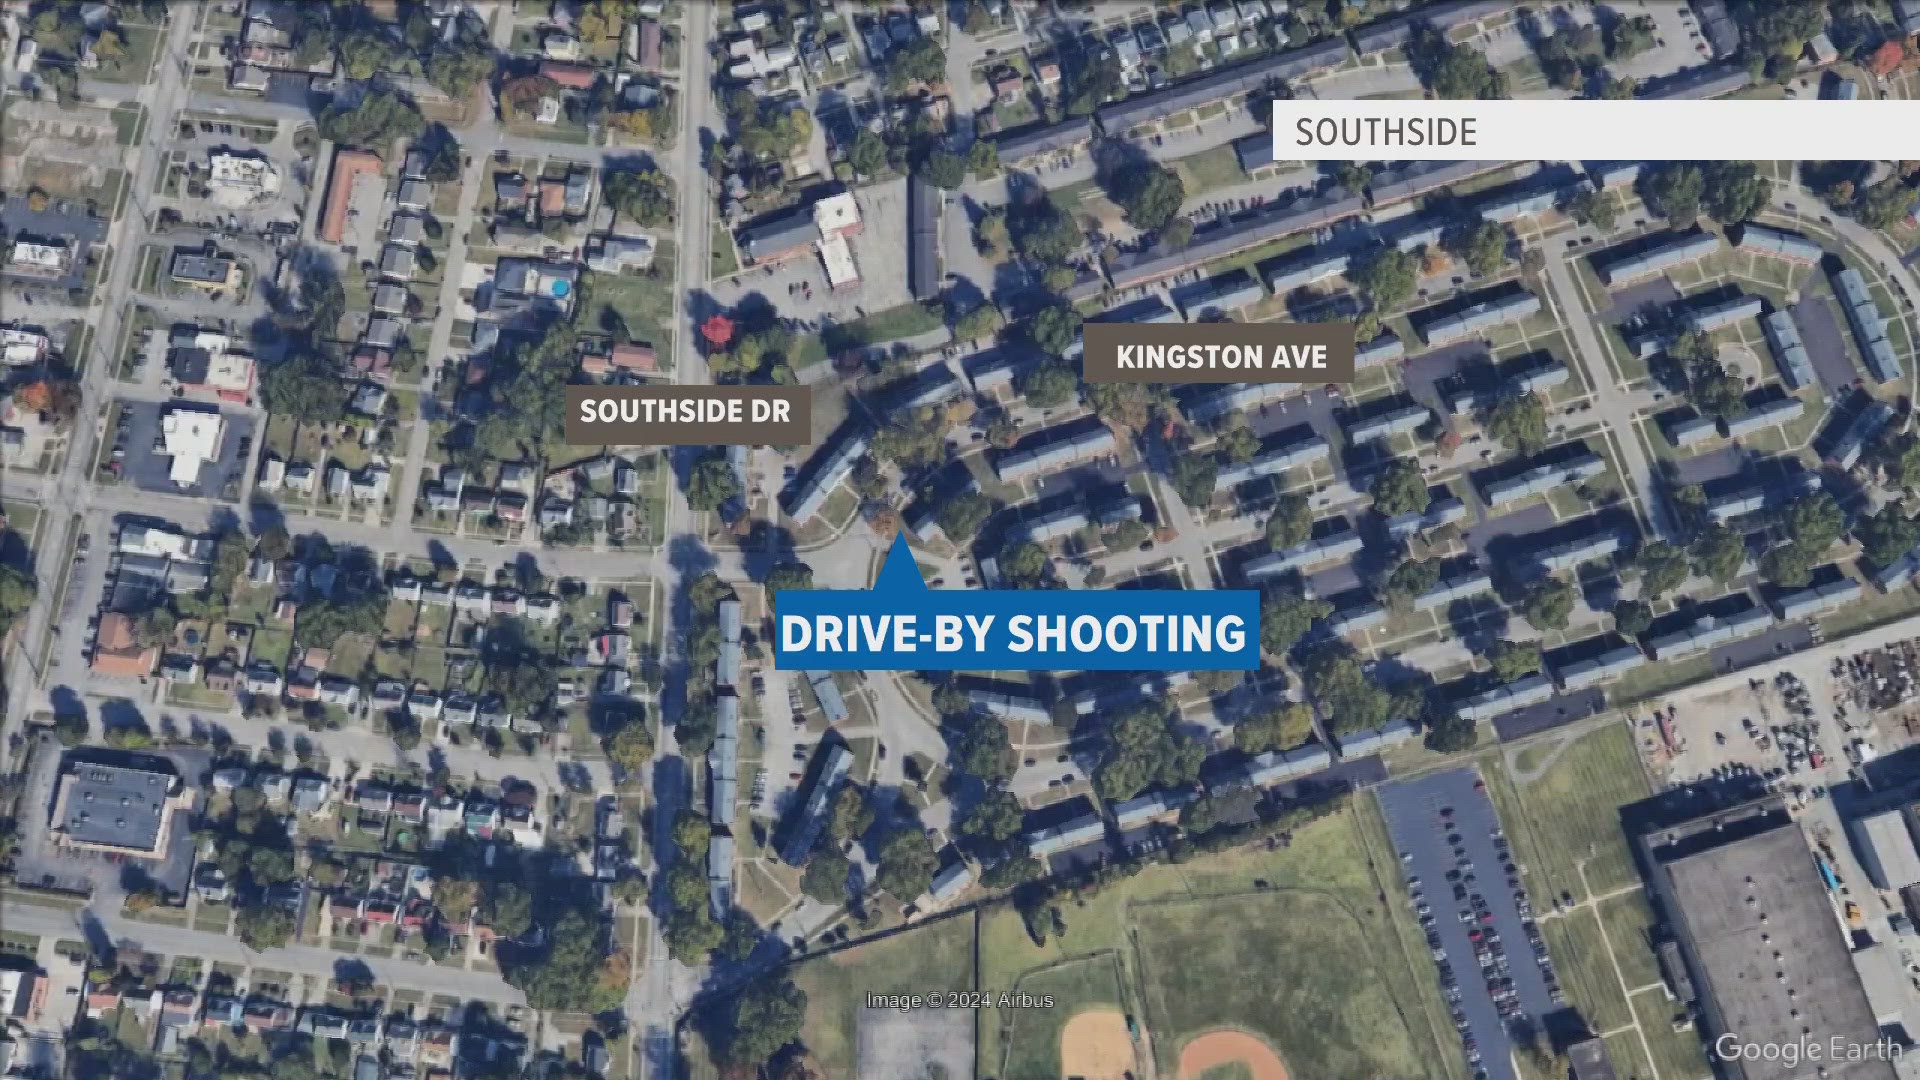 Police said a man and an 8-year-old were injured in an apparent drive-by shooting in the 100 block of Kingston Avenue Sunday night.